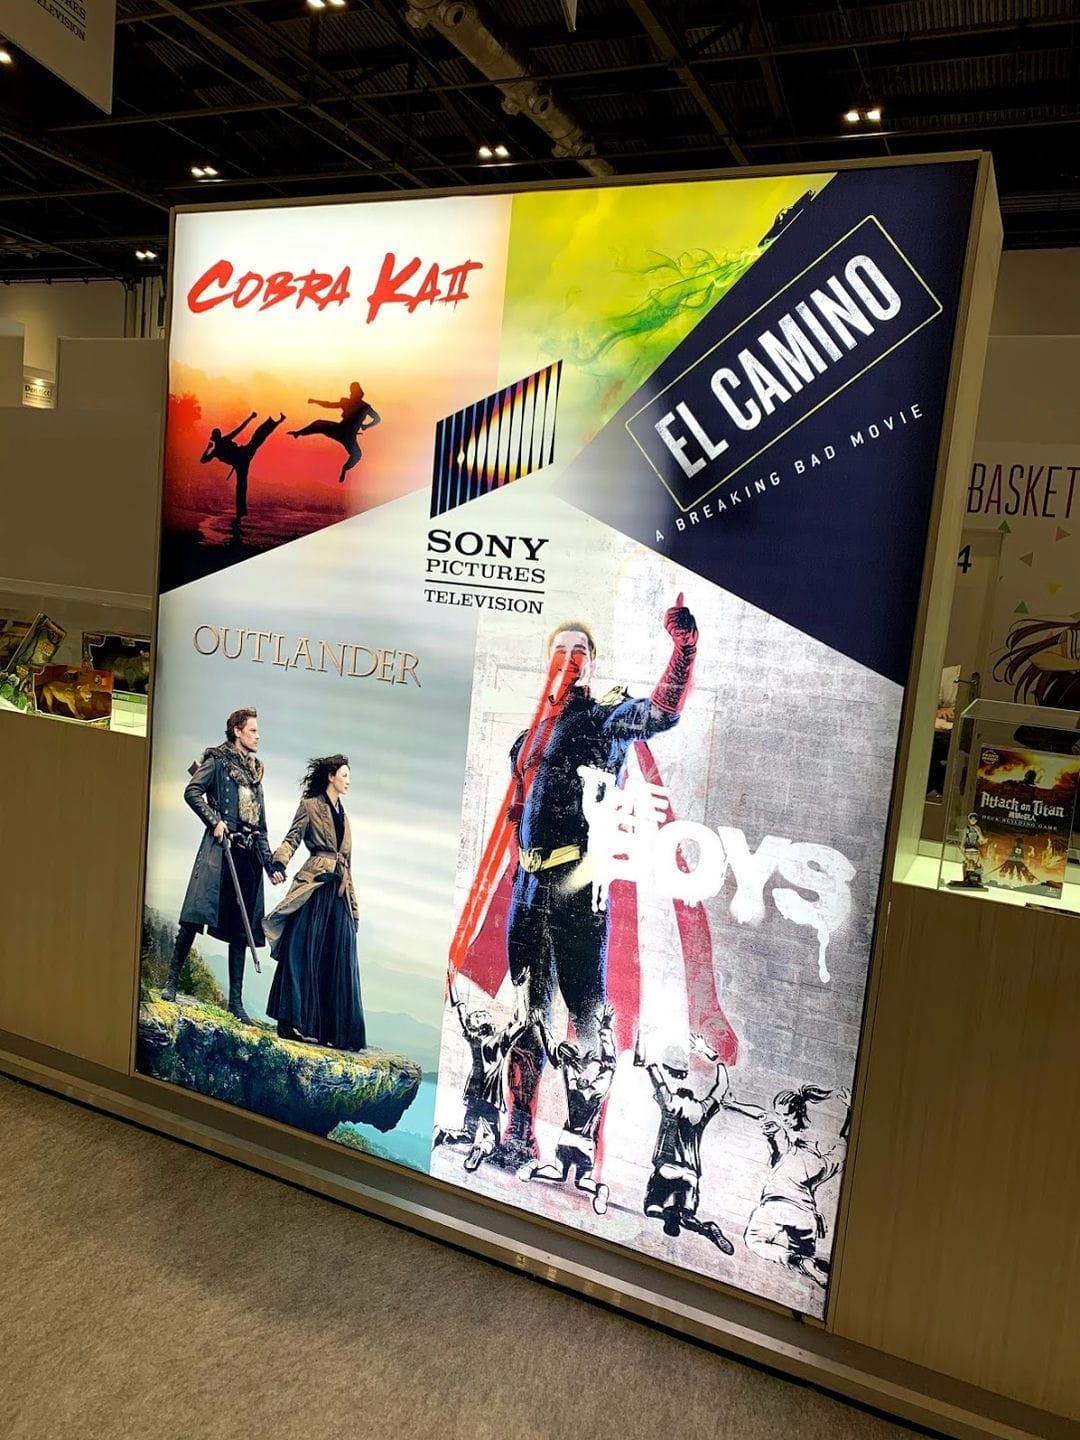 SONY Pictures Identity Brand Licensing Europe BLE 2019